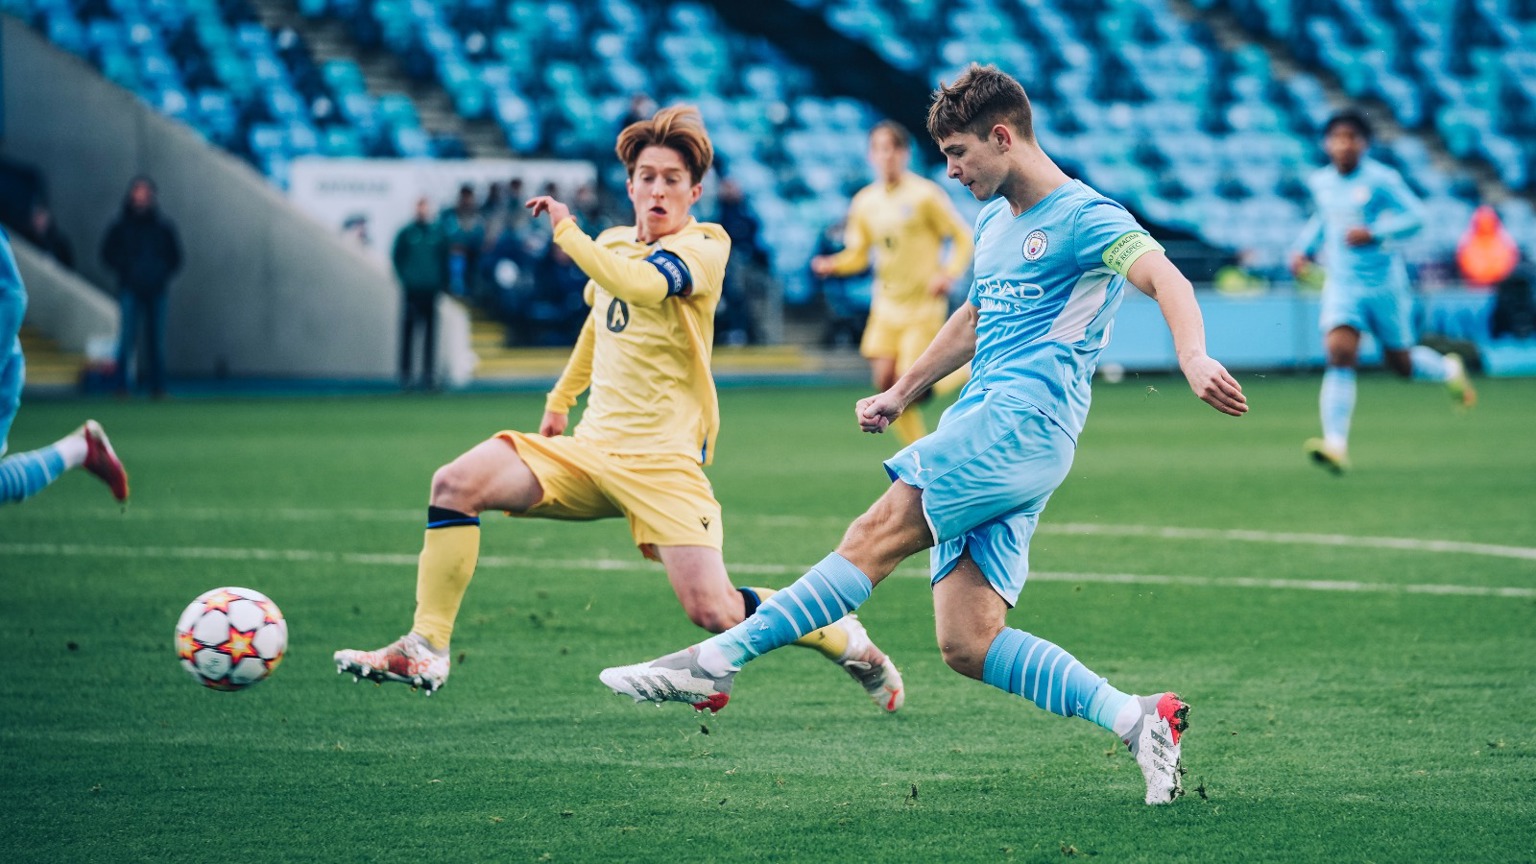 City edged out in eight-goal UEFA Youth League thriller